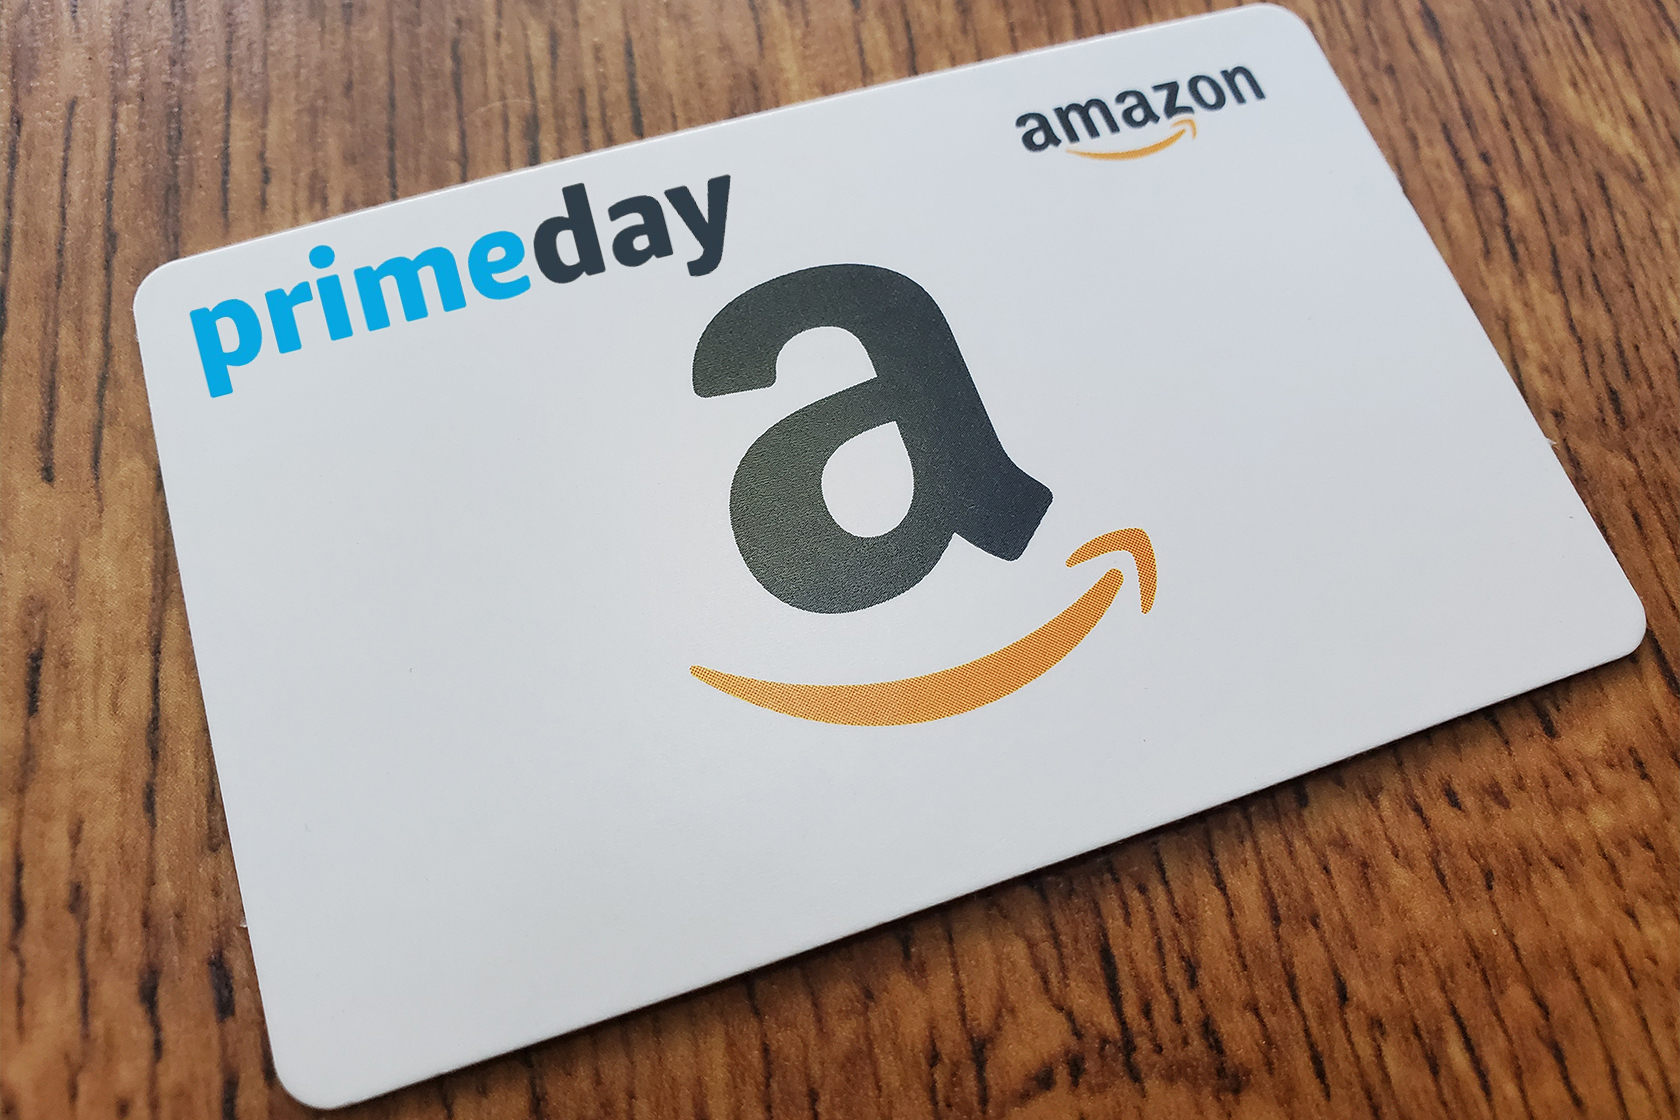 Get free money with gift card purchases on Amazon Prime Day (Update:  Expired) | ZDNET